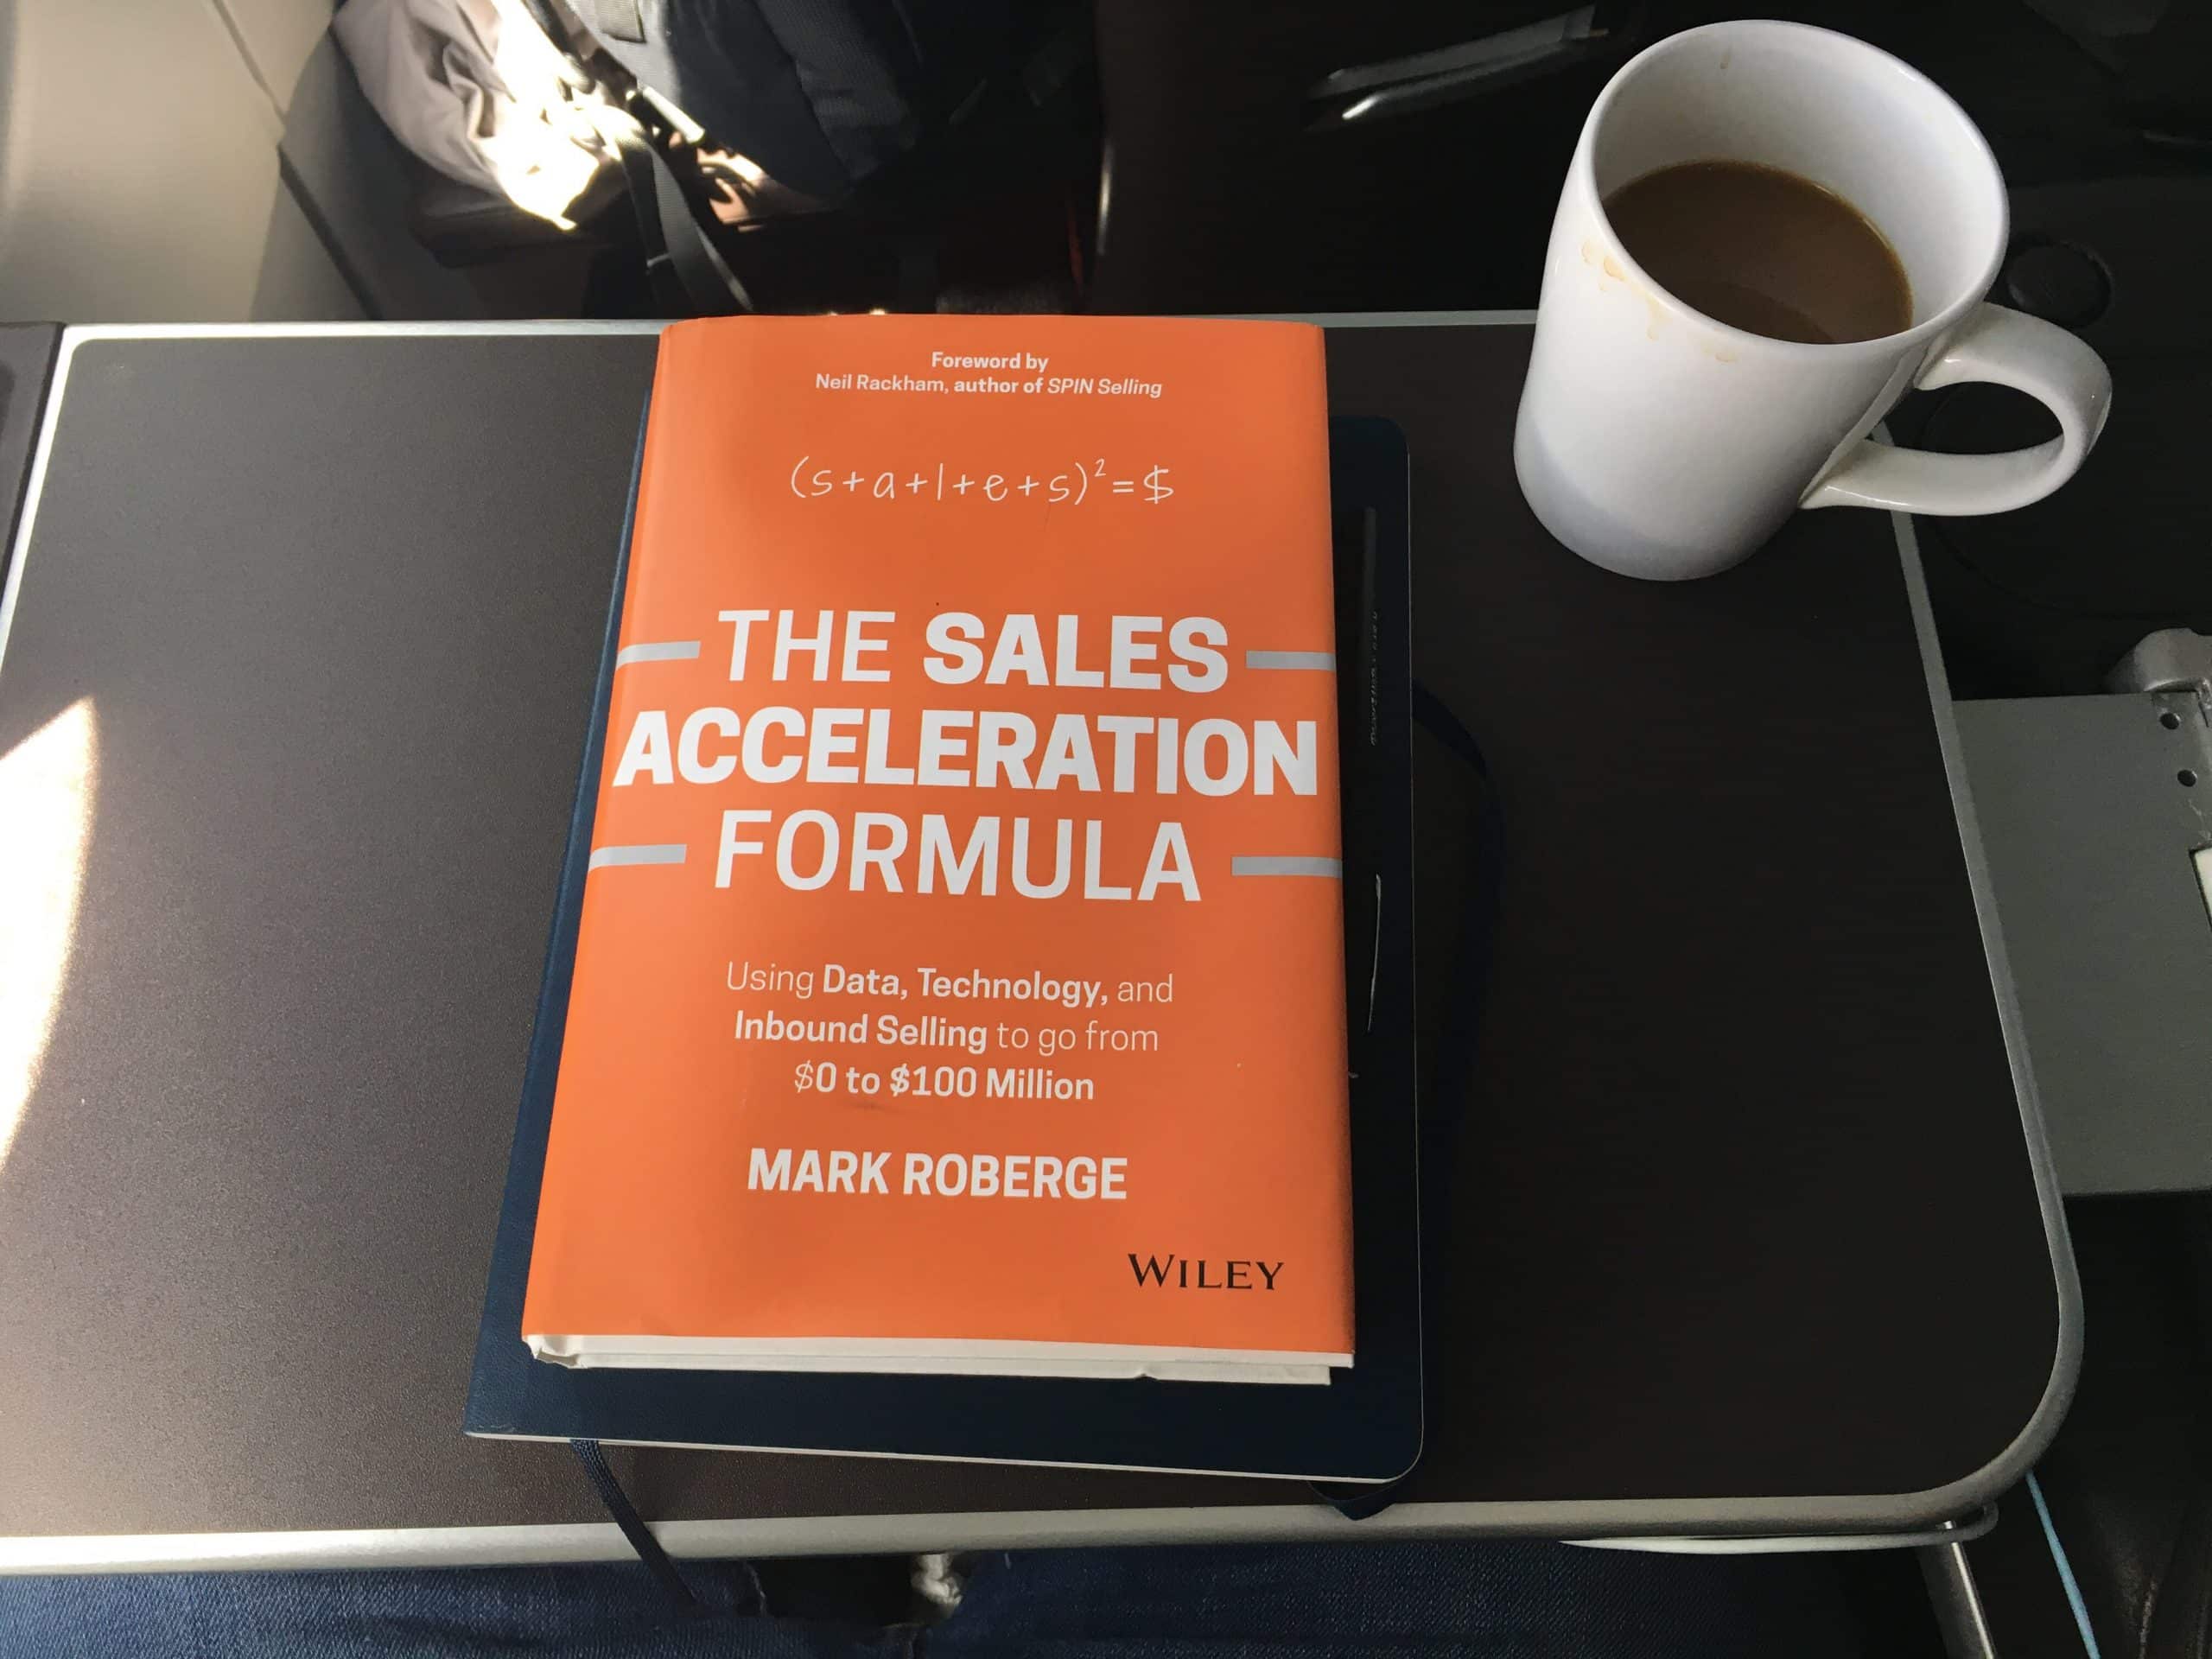 Our takeaways from The Sales Acceleration Formula